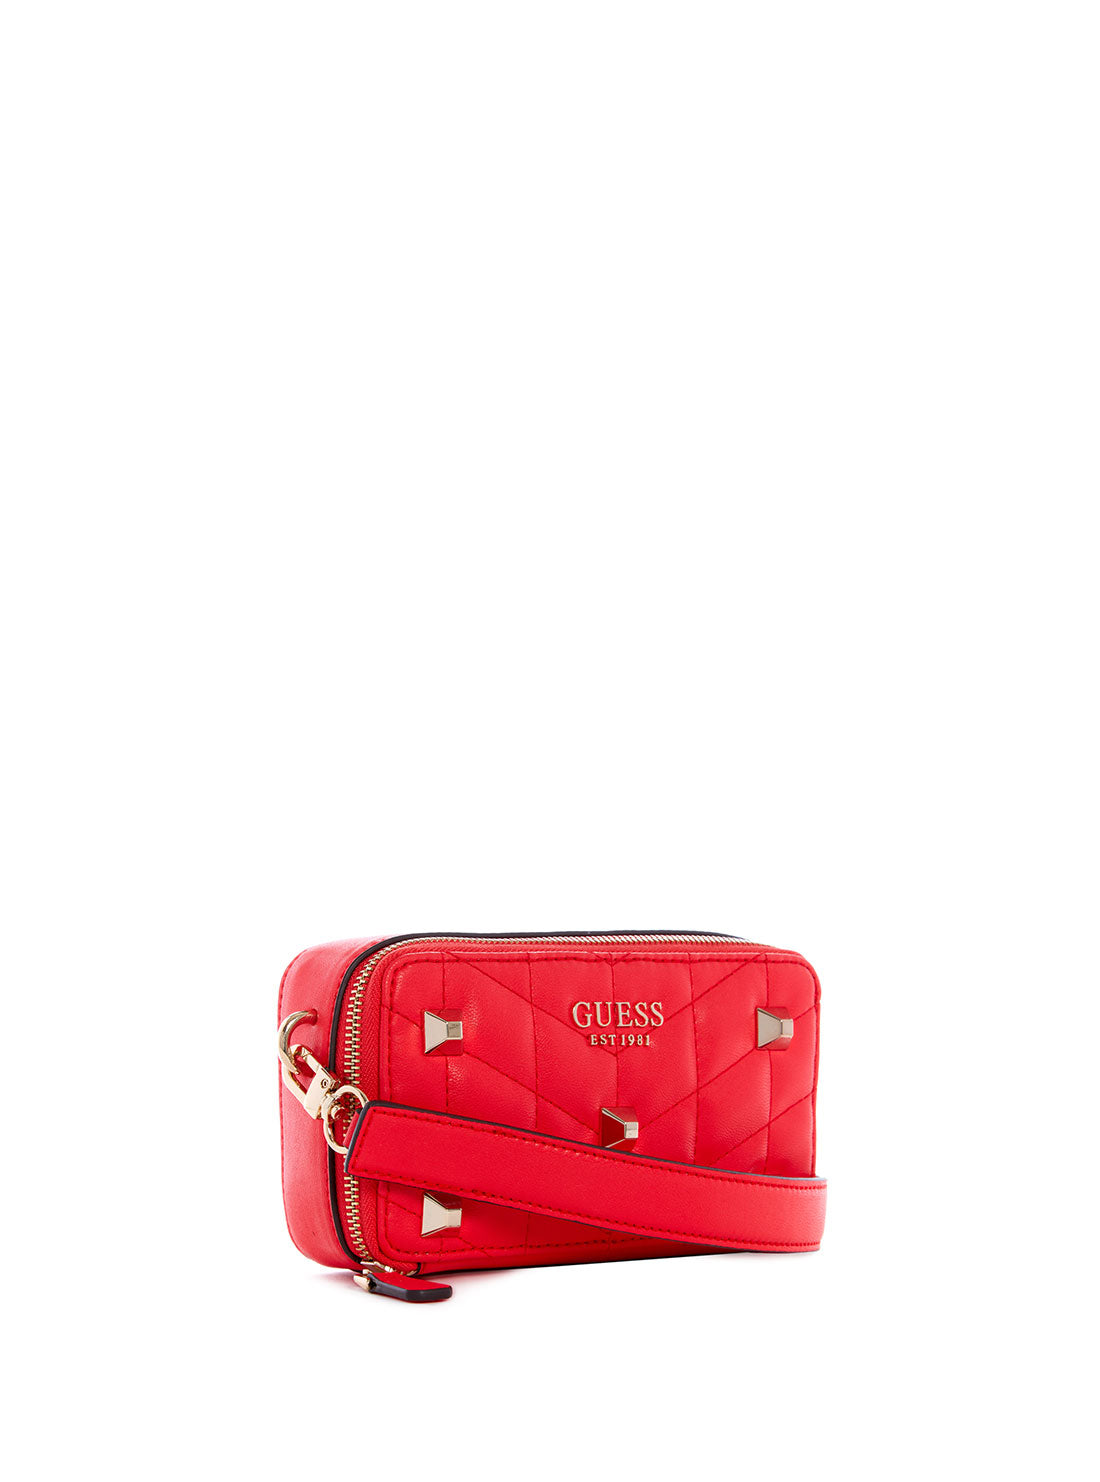 GUESS Women's Red Brera Studded Mini Crossbody Camera Bag QG840472 Front Side View